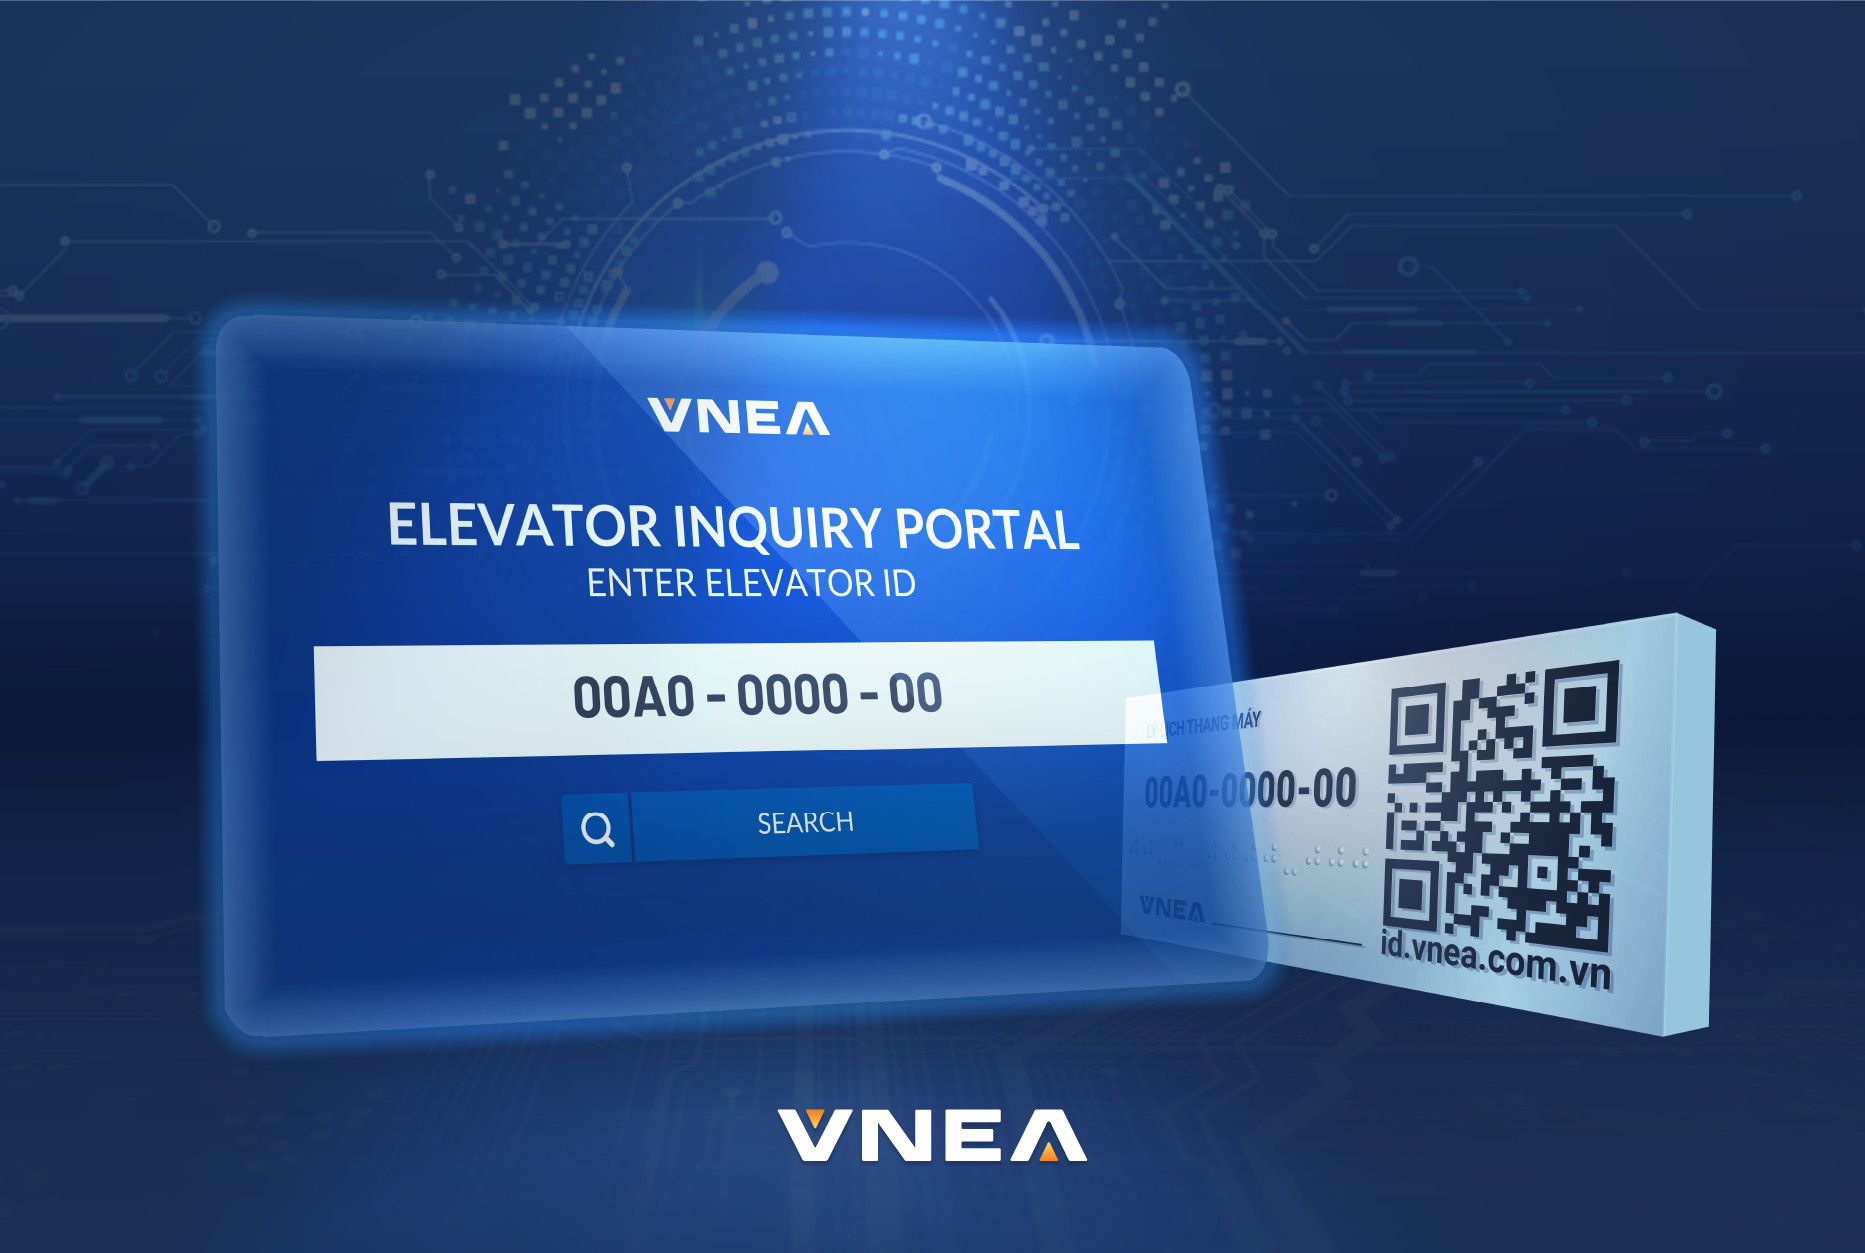 Why should elevators be equipped with identification codes?